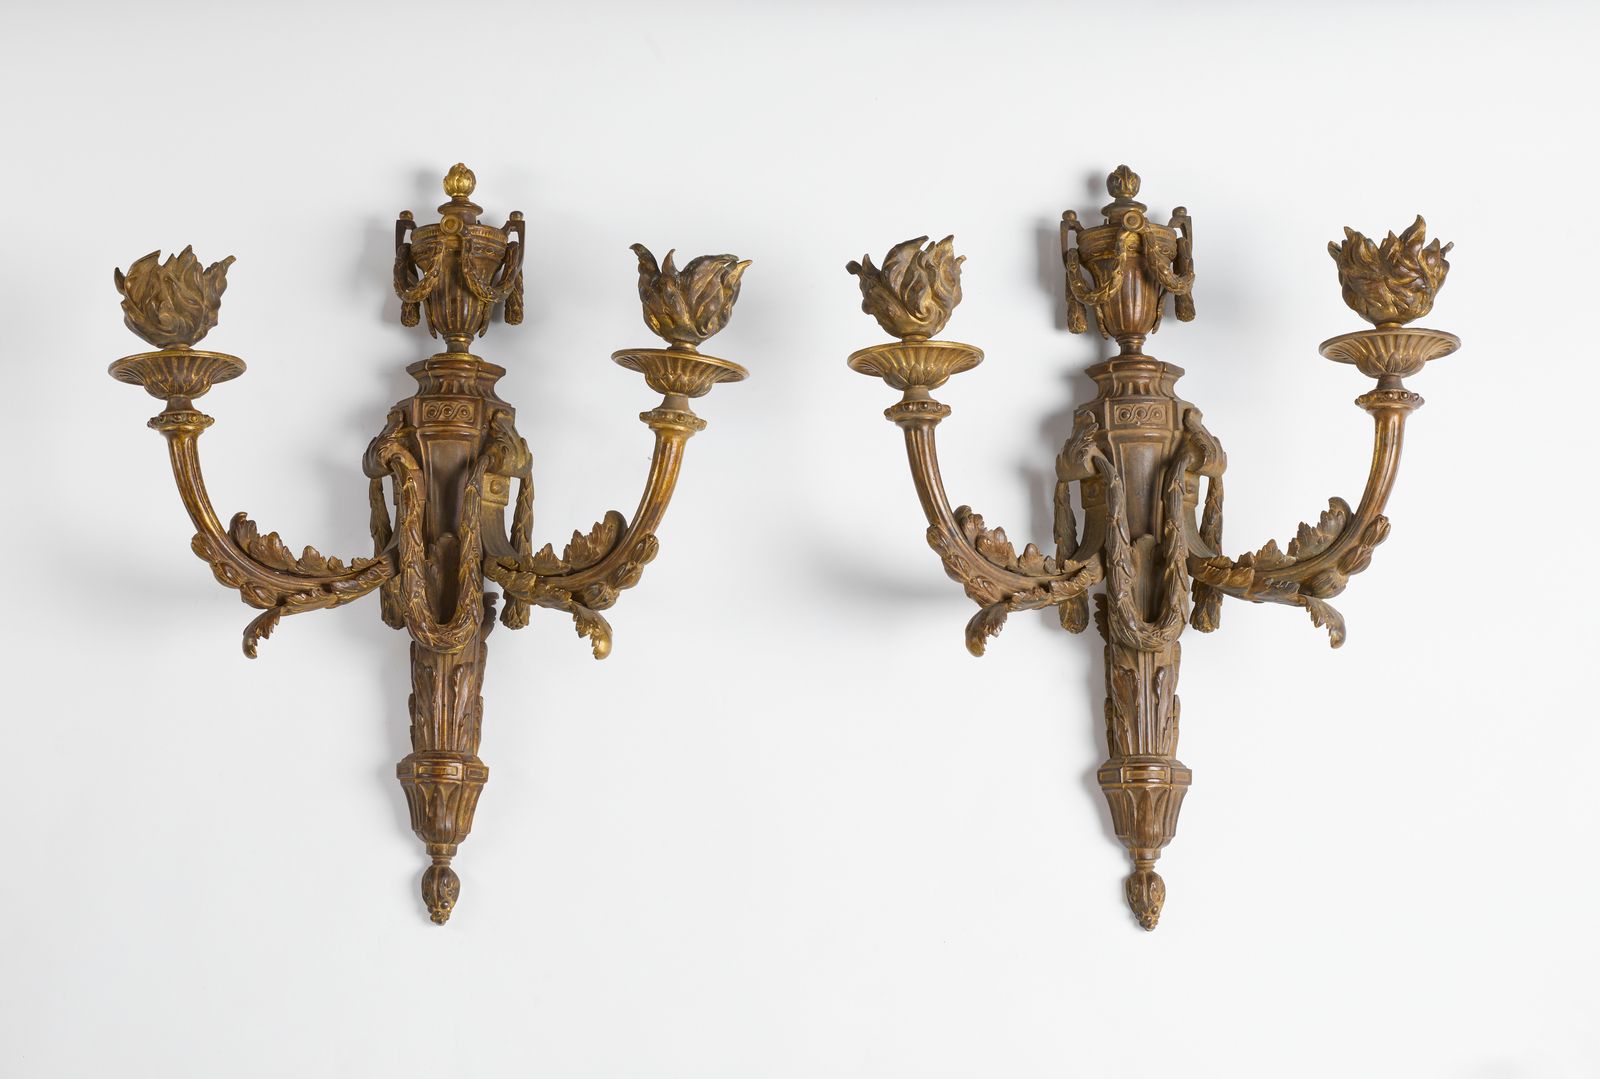 19th CENTURY FRENCH MANUFACTURE 19th CENTURY FRENCH MANUFACTURE. A pair of bronz&hellip;